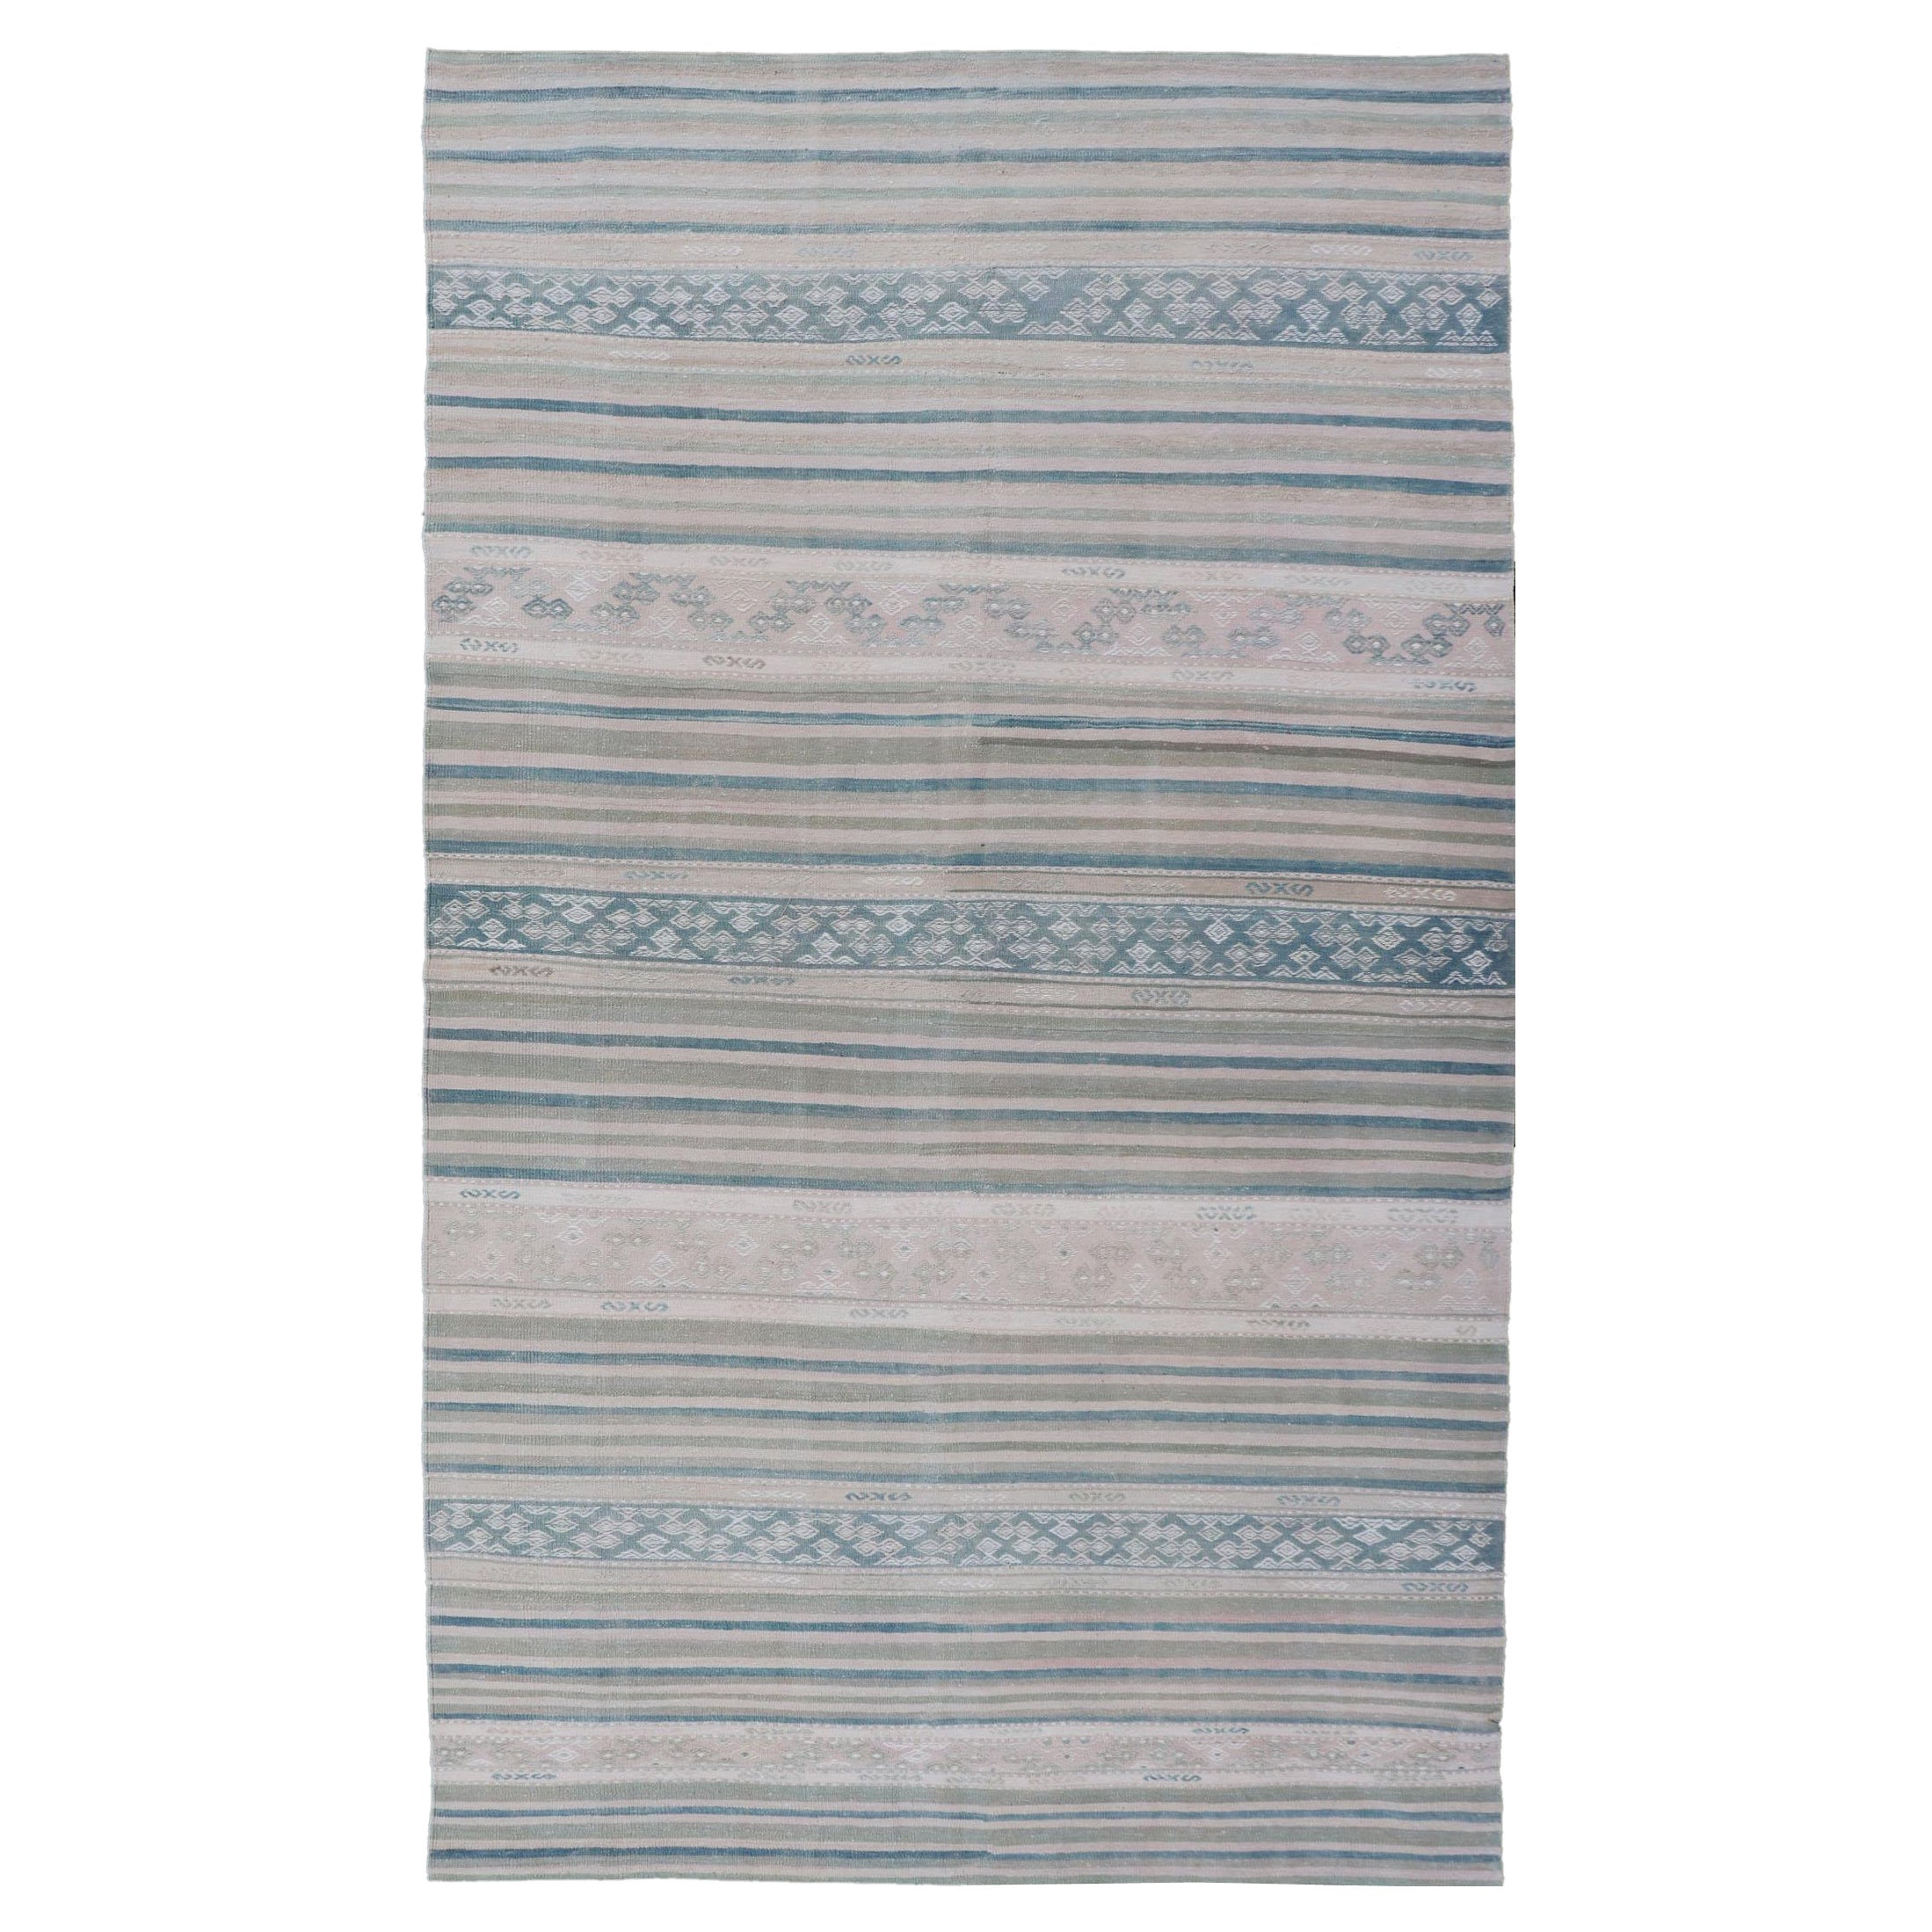 Vintage Flat-Weave Kilim with Embroideries in Blush, Green, Blue and Gray For Sale